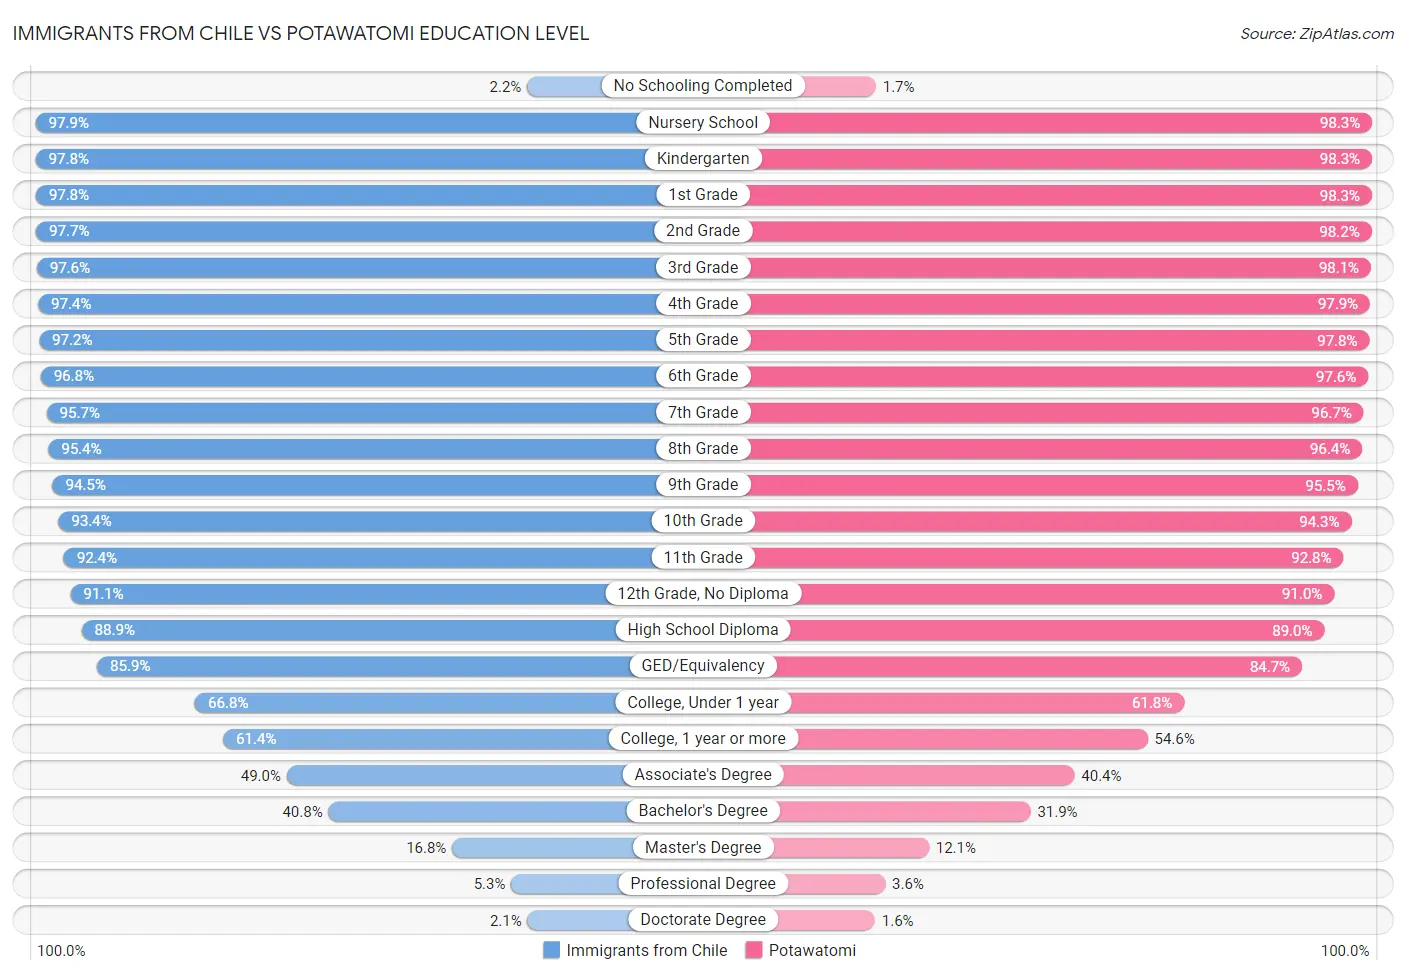 Immigrants from Chile vs Potawatomi Education Level